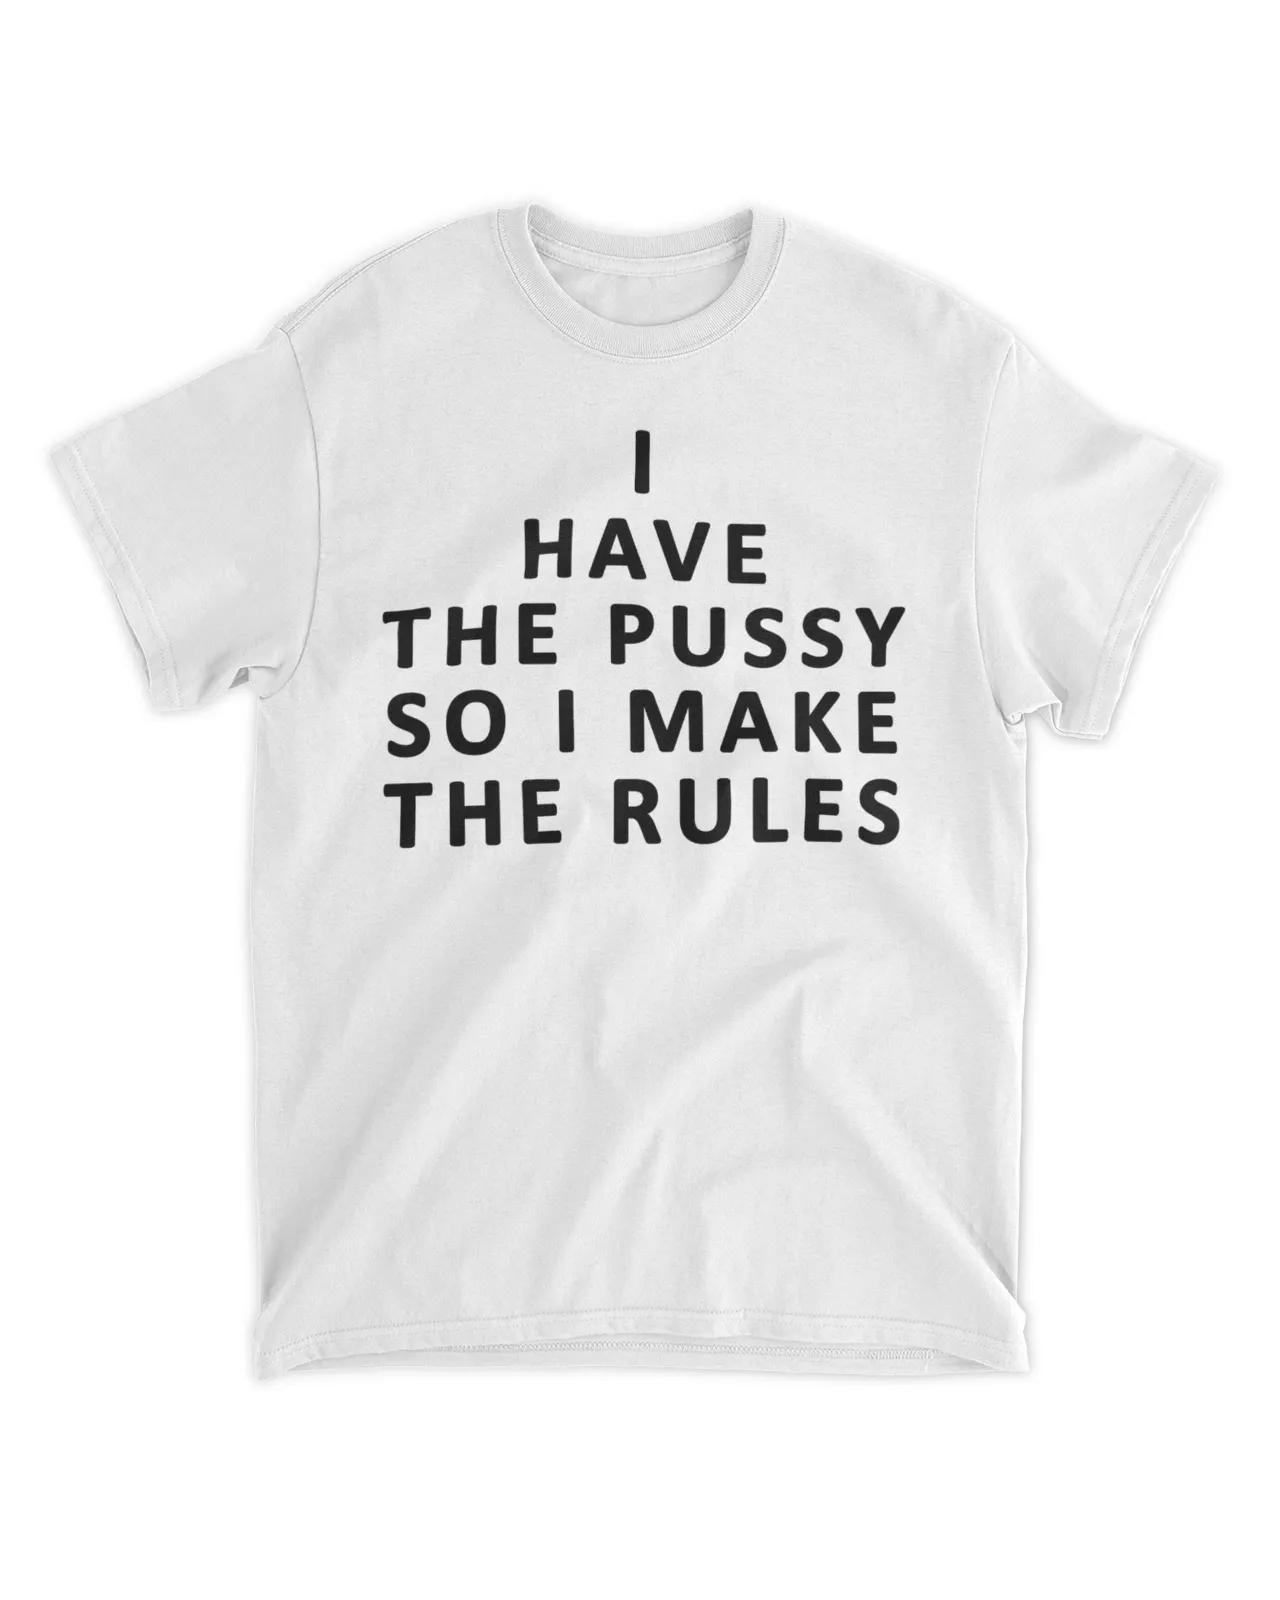  I have the pussy so I make the rules shirt